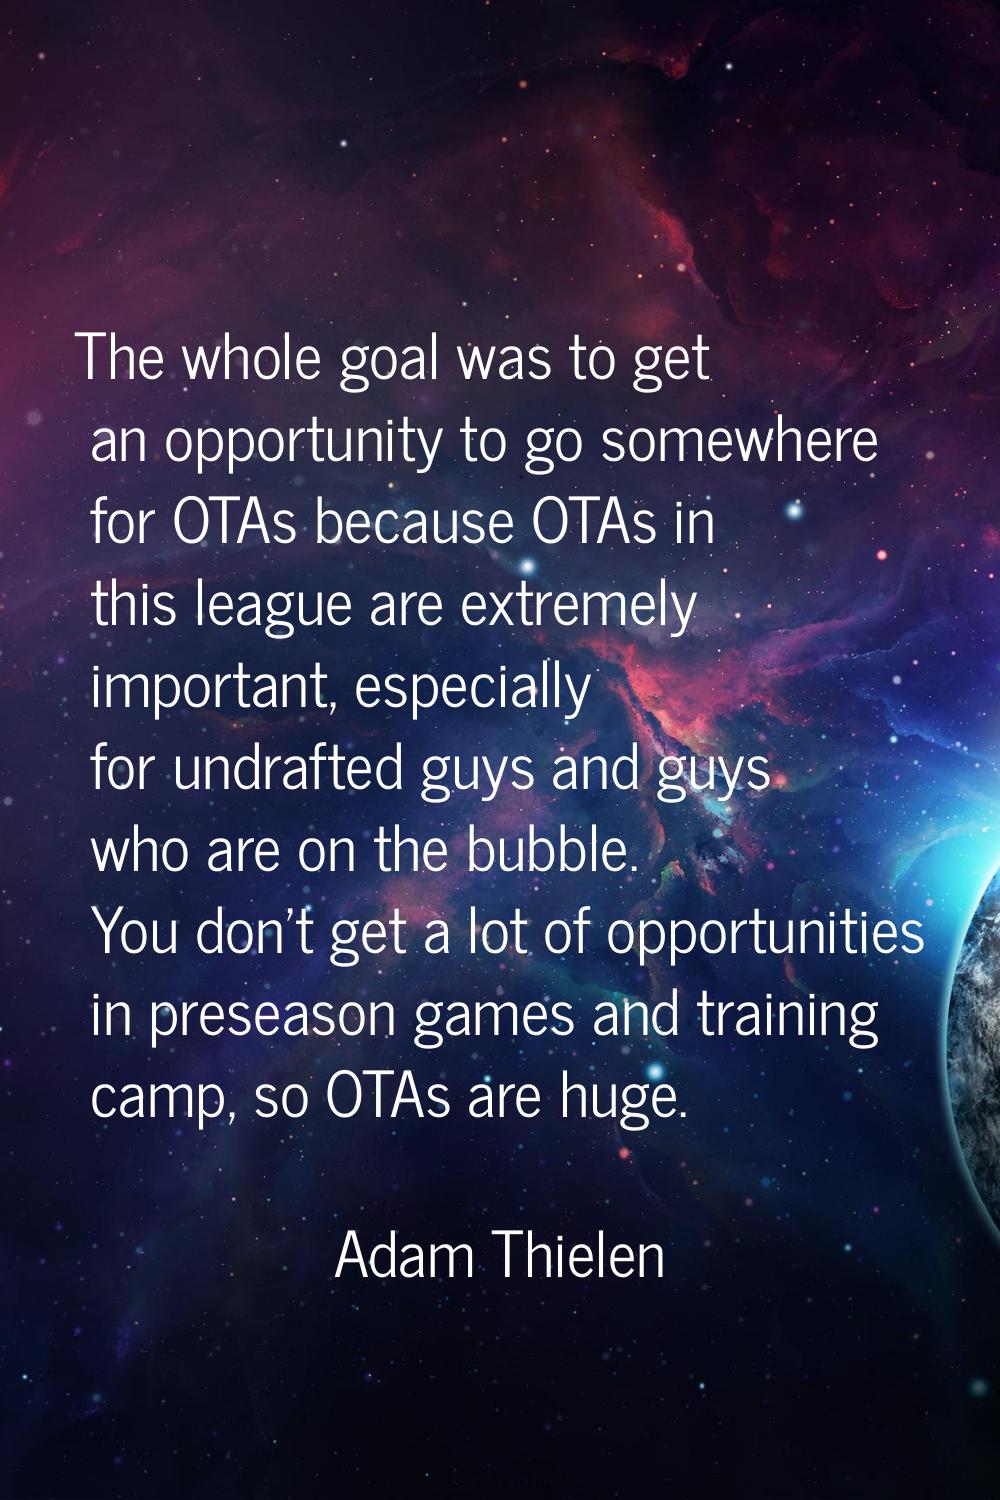 The whole goal was to get an opportunity to go somewhere for OTAs because OTAs in this league are e